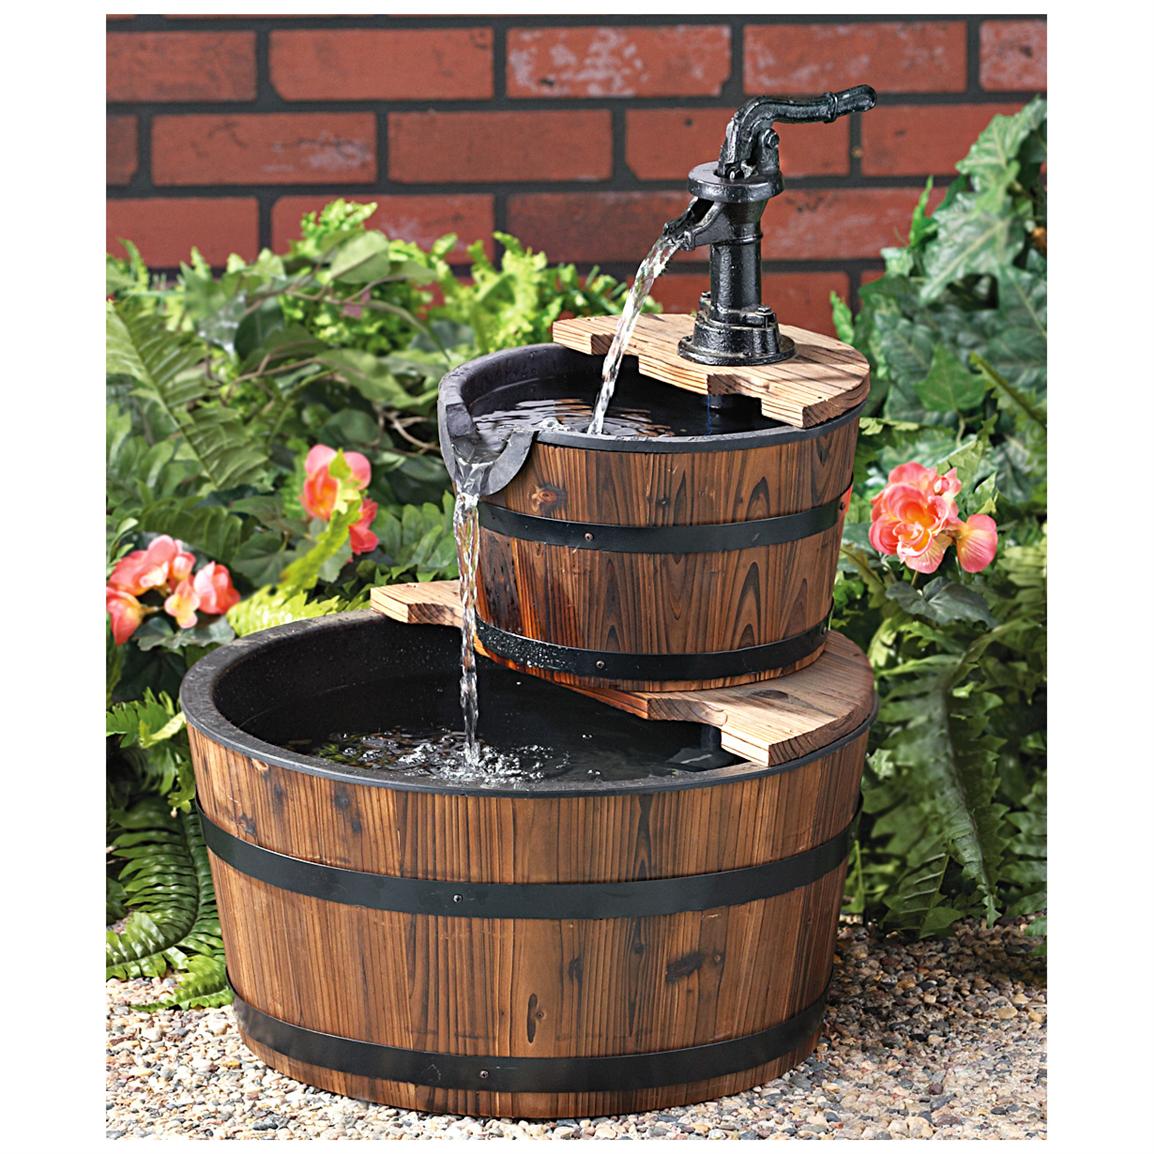 Outdoor Water Fountains For Sale In Canada